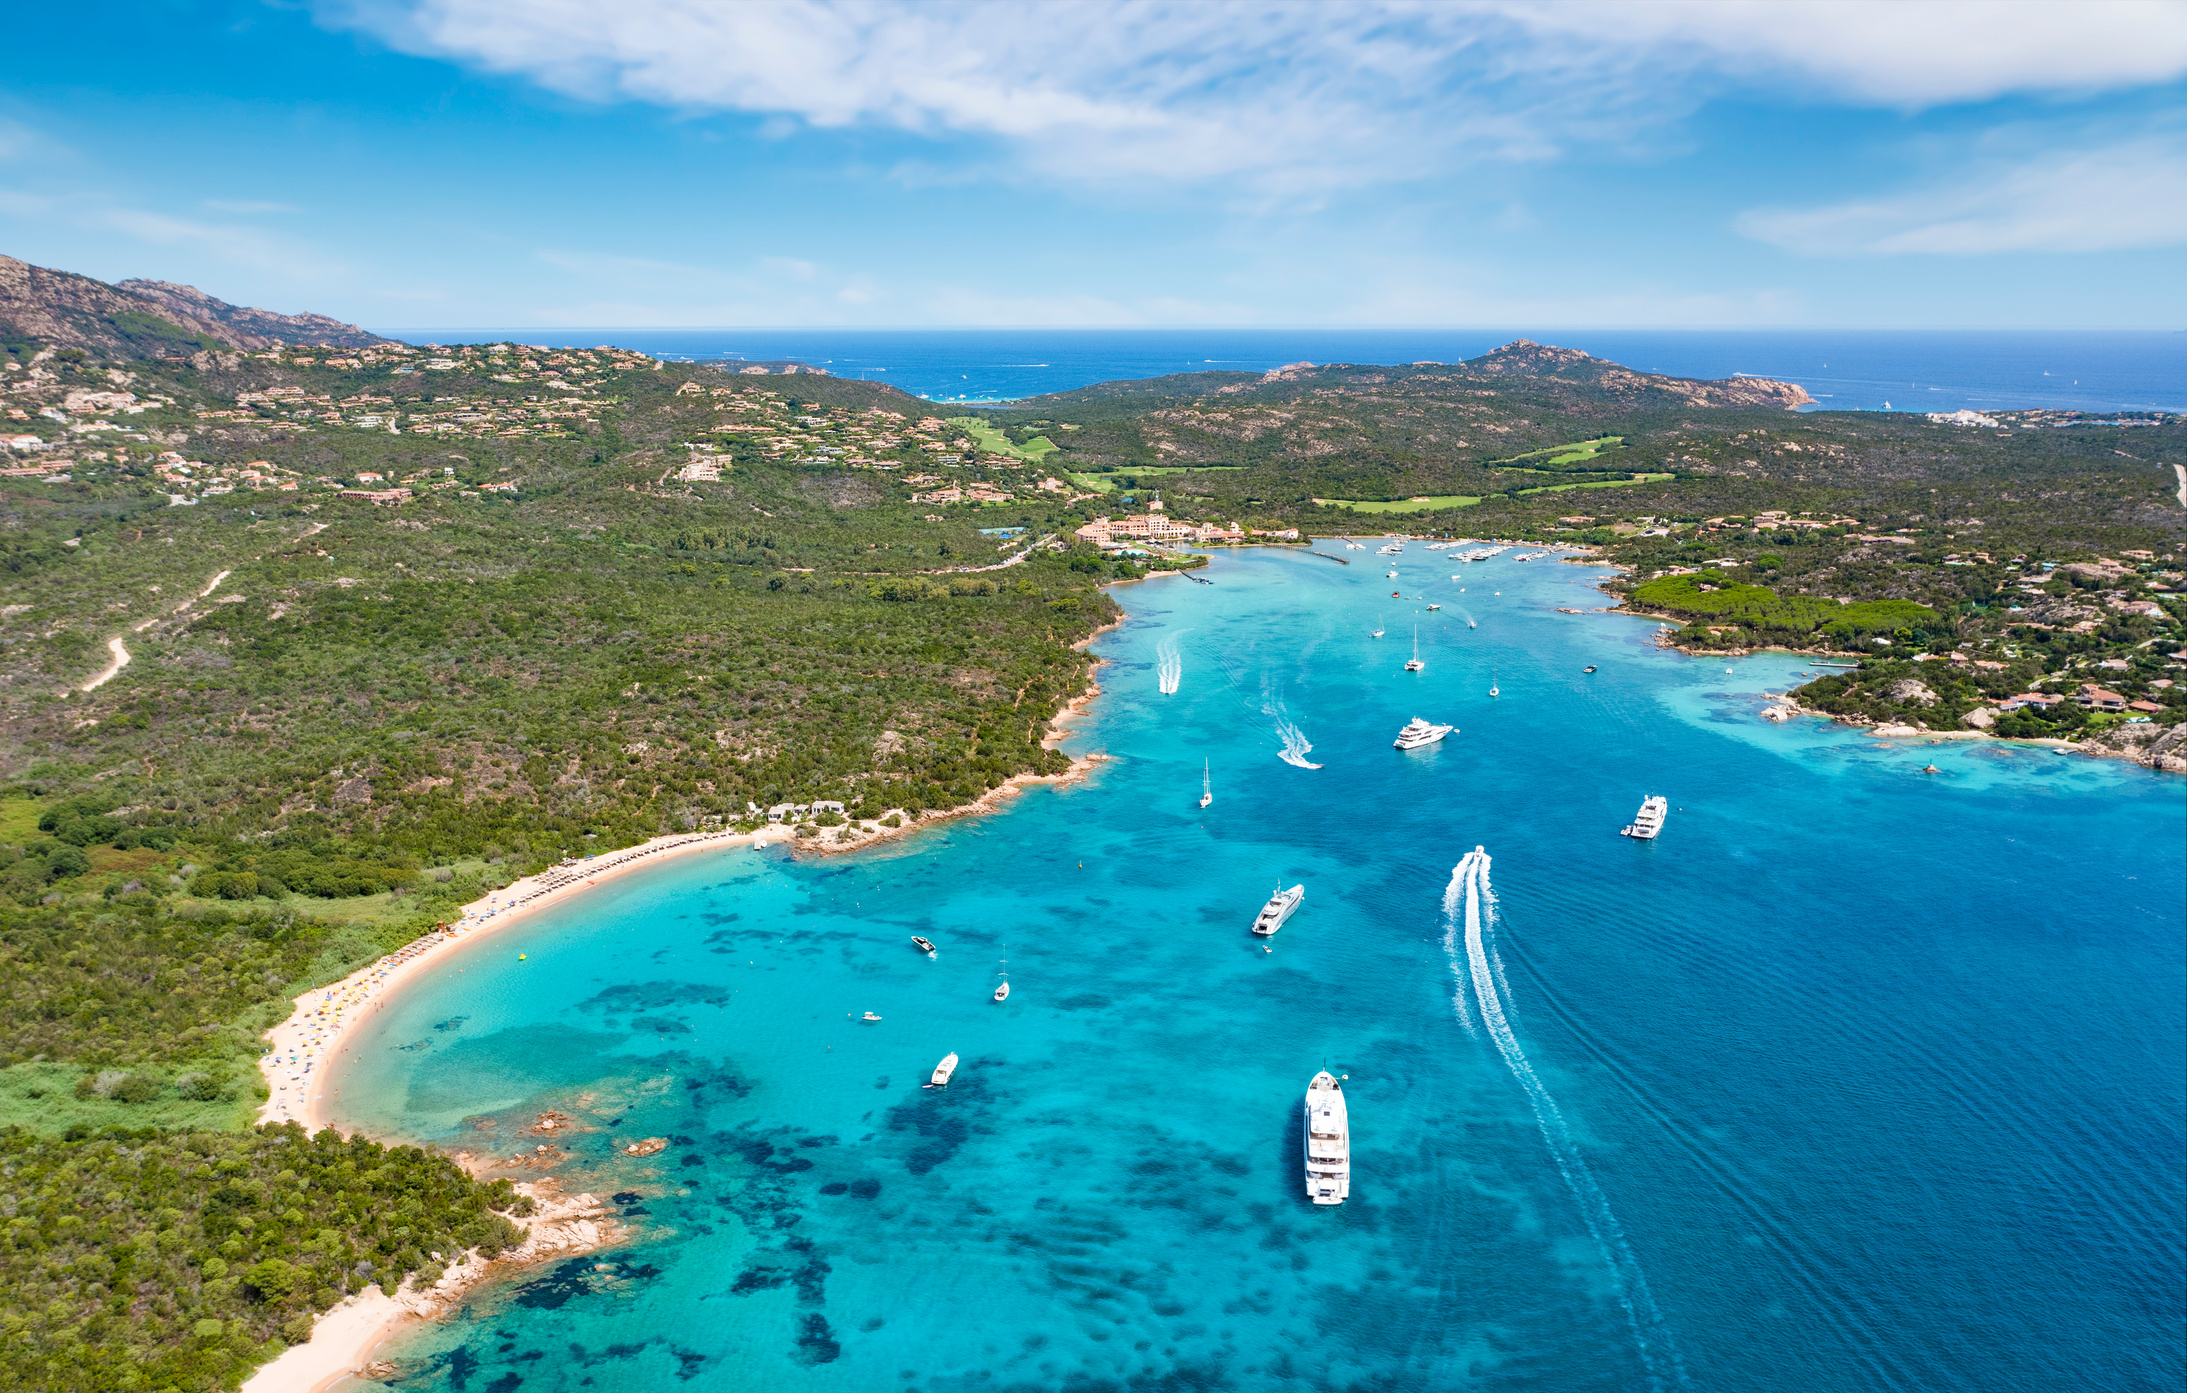 View from above, stunning aerial view of the Cala di volpe bay with a green coastline, white sand beaches and luxury yachts sailing on a turquoise water. Liscia Ruja, Costa Smeralda, Sardinia, Italy.